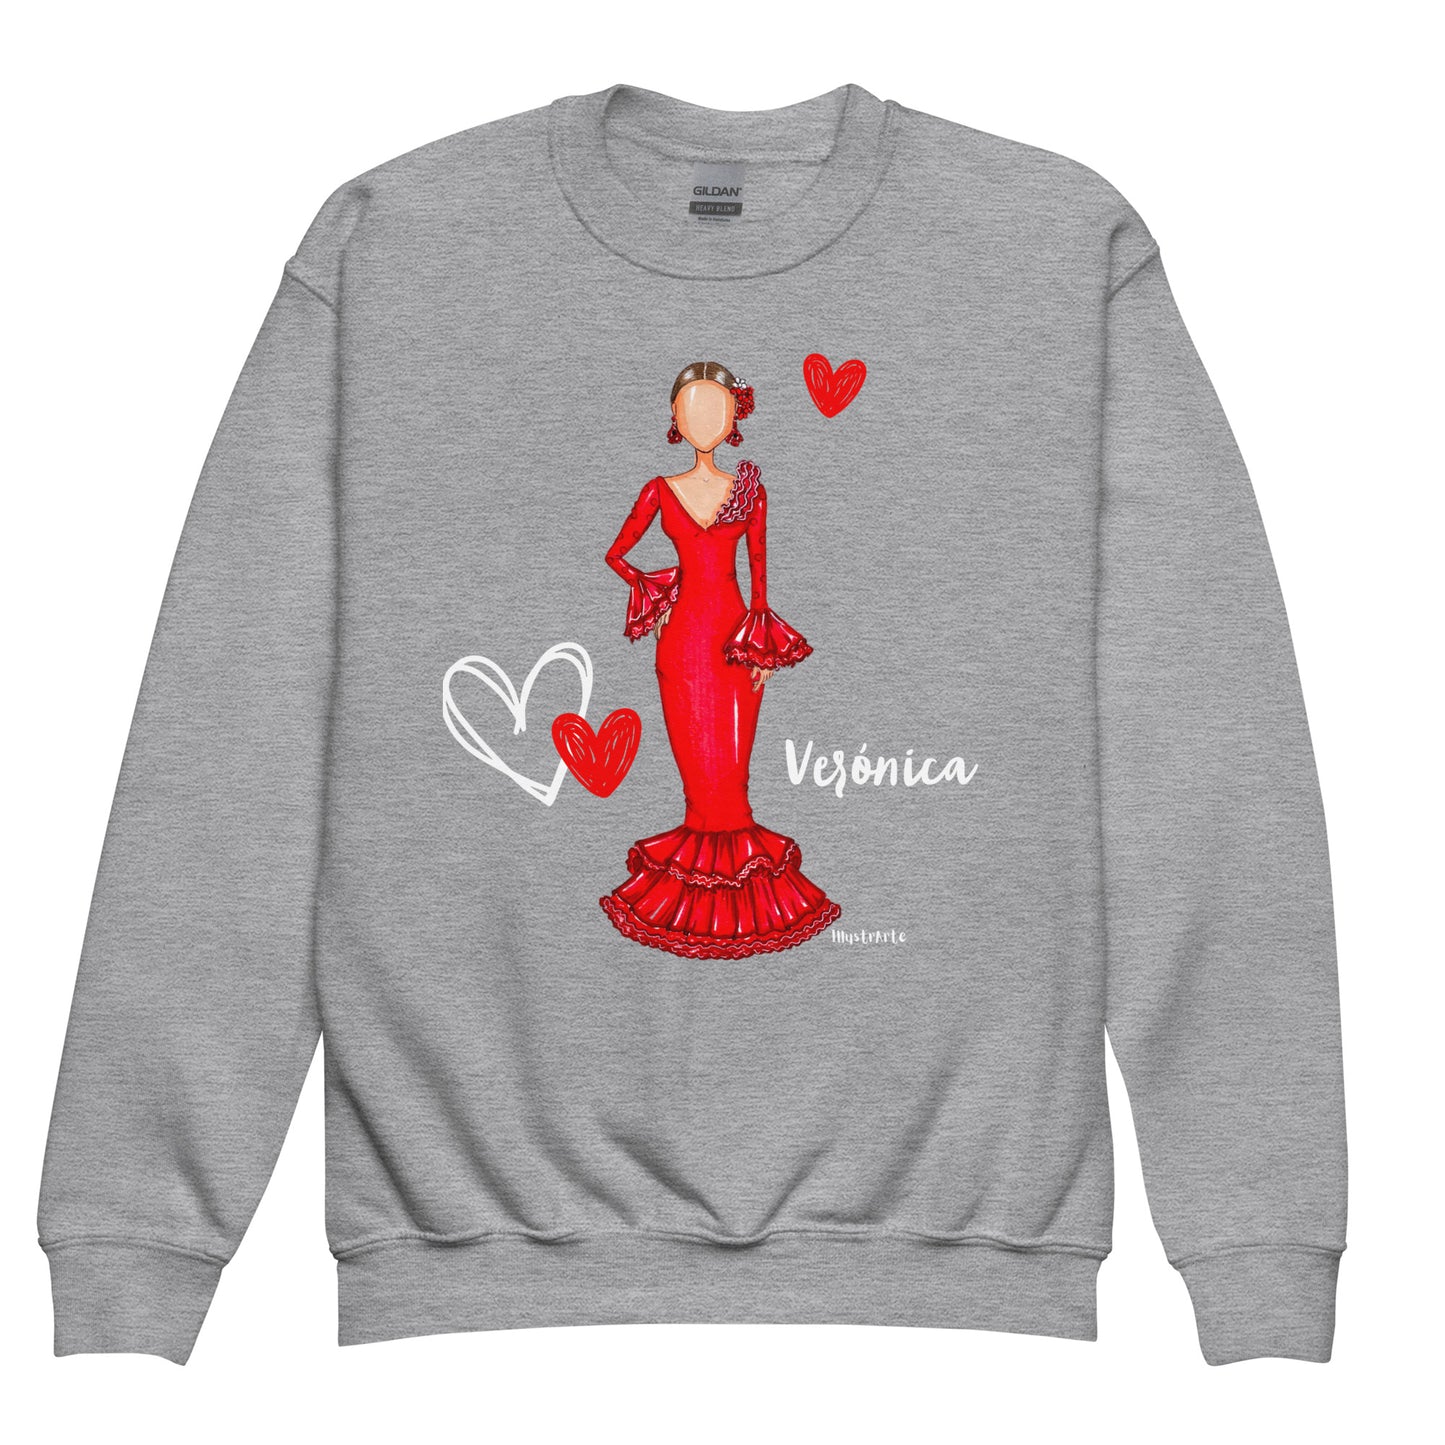 a sweater with a woman in a red dress